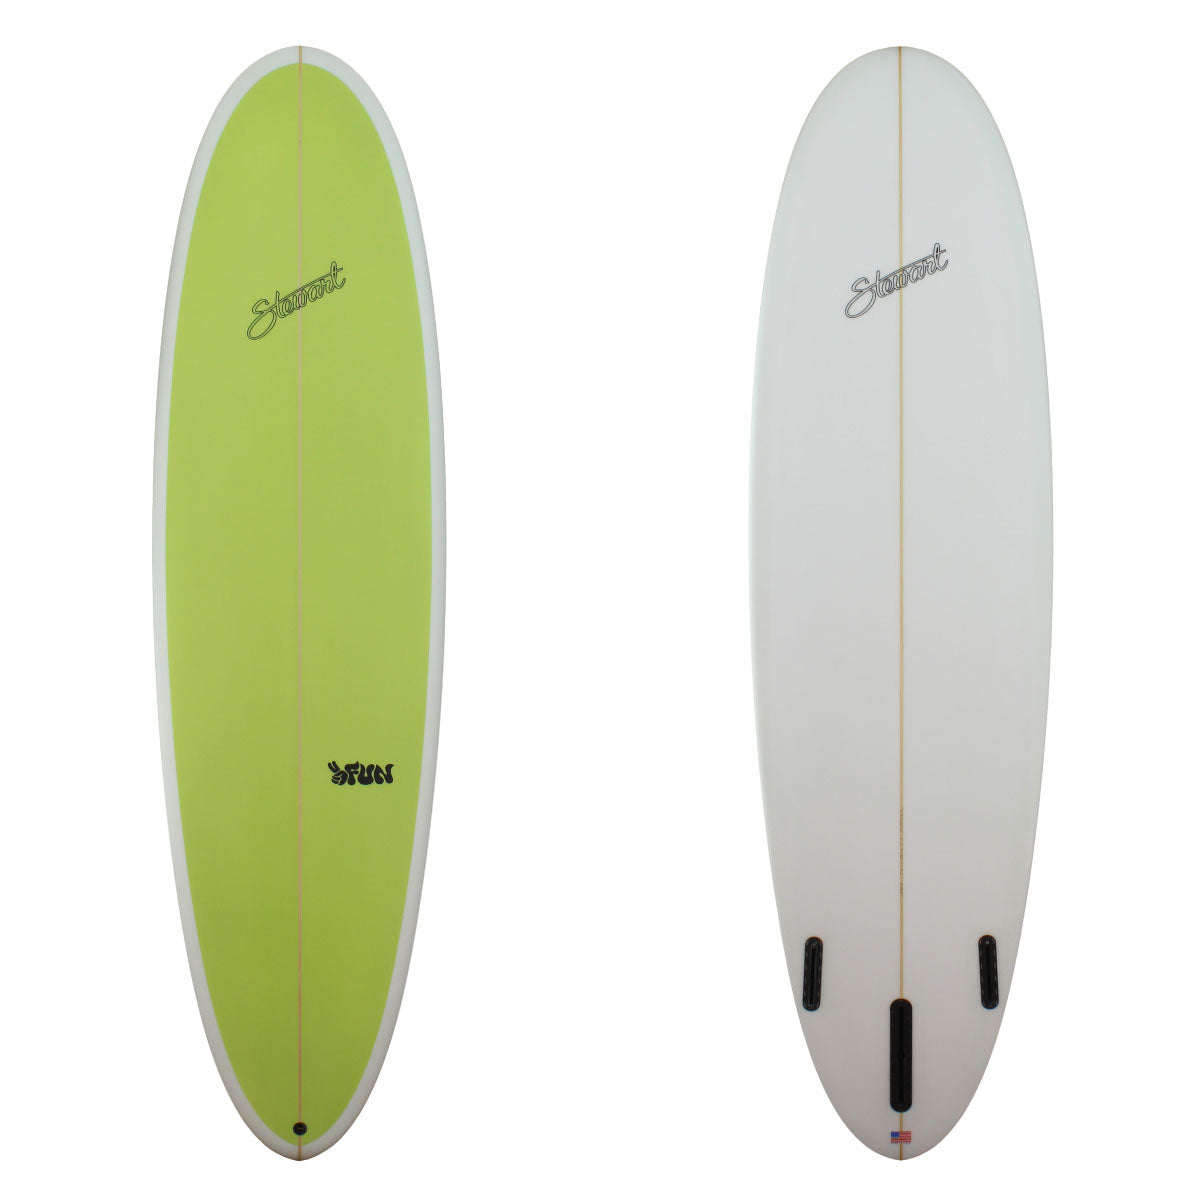 Stewart 7'6" 2FUN Mid Length with lime green deck and clear bottom (7'6", 22 1/2", 3") B#127617